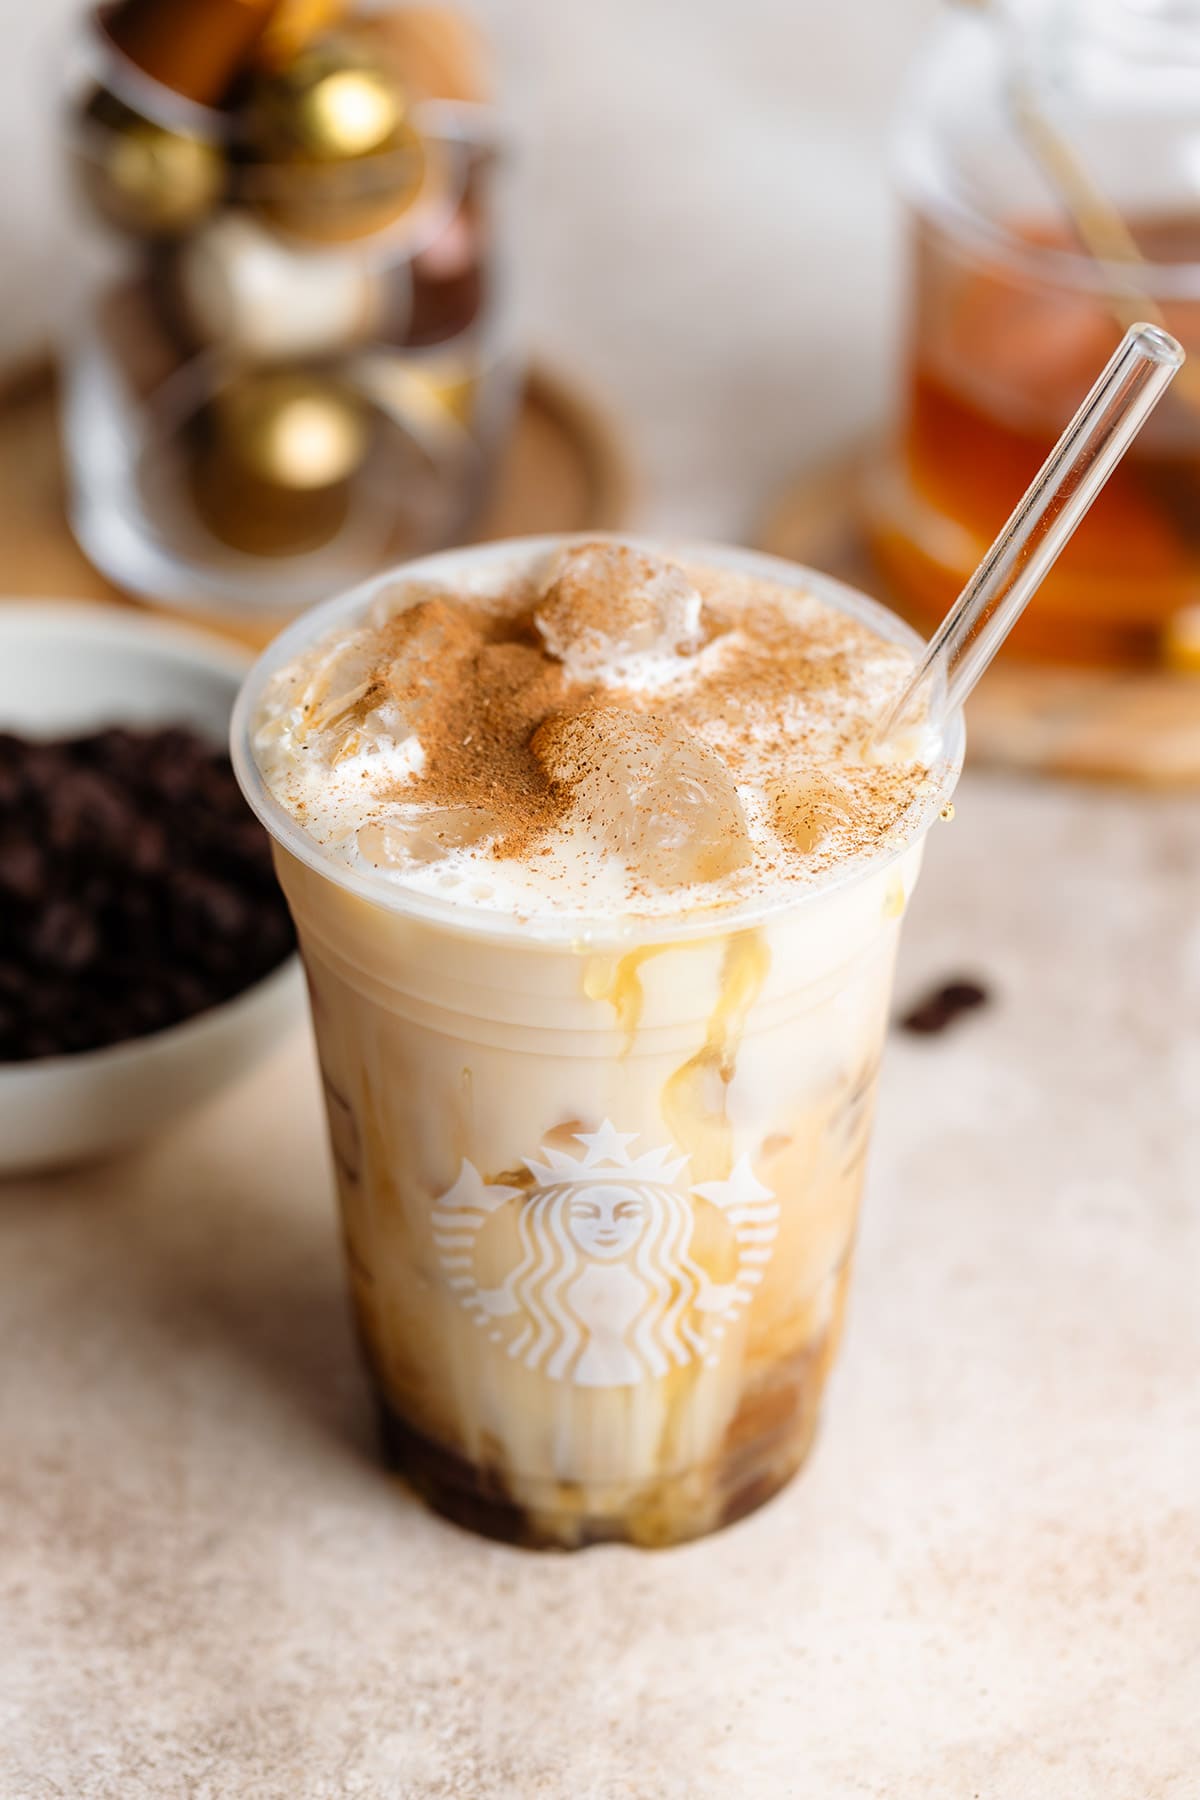 Almond milk slowly mixing into iced espresso in a plastic Starbucks cup with a glass straw and a cinnamon sprinkle on top.